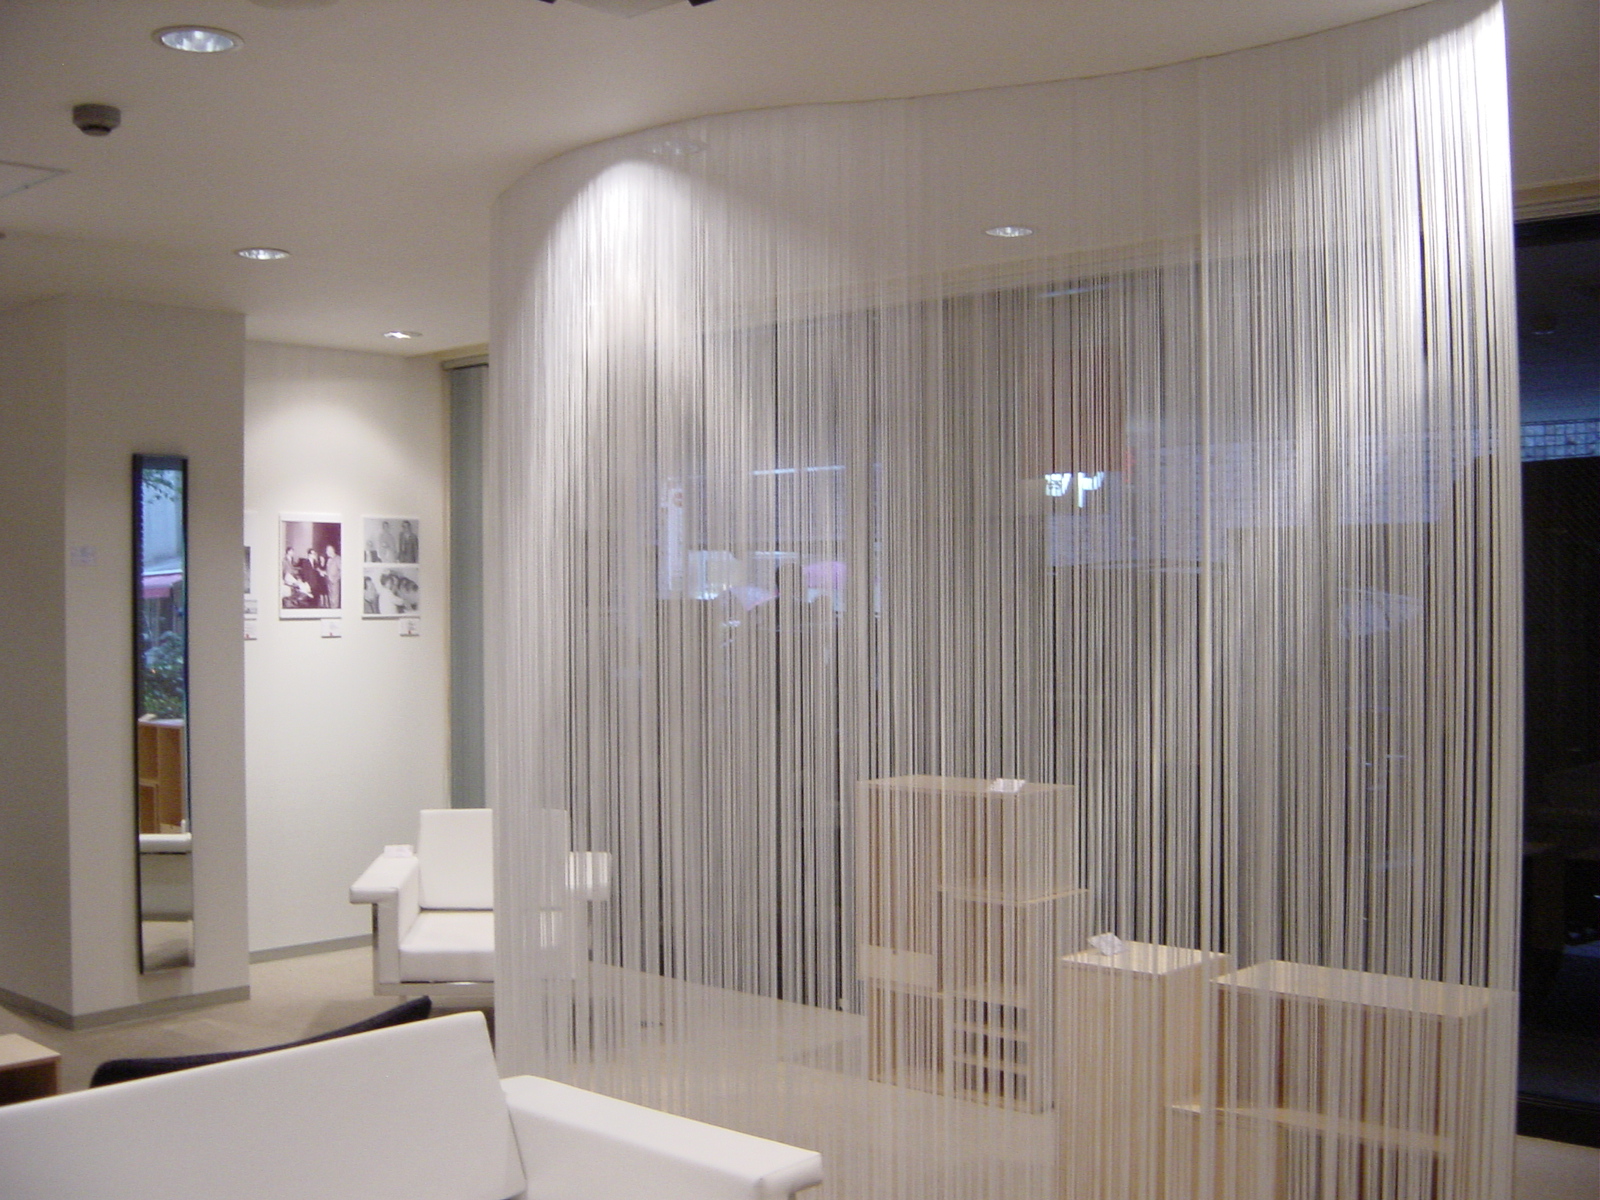 beautiful lurex tulle in the interior of the hallway